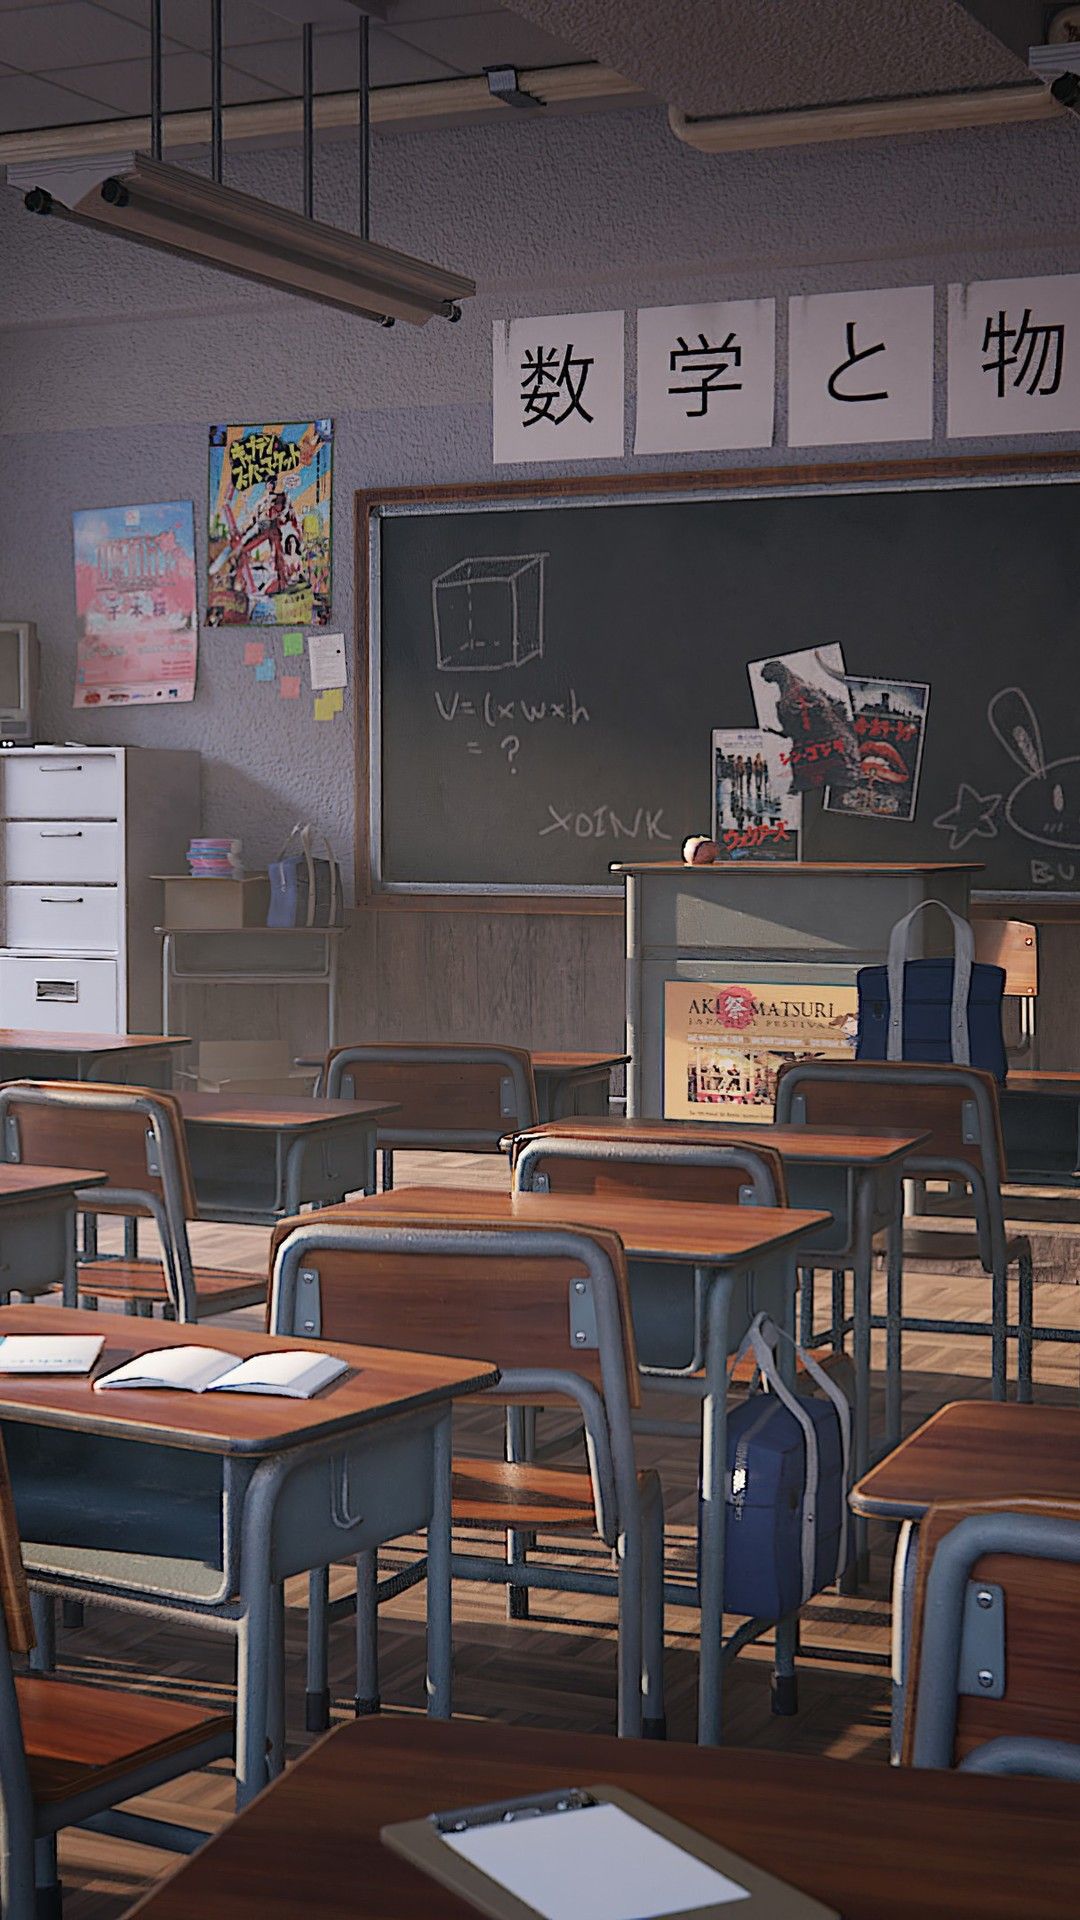 Mobile wallpaper: Anime, Room, Classroom, 988553 download the